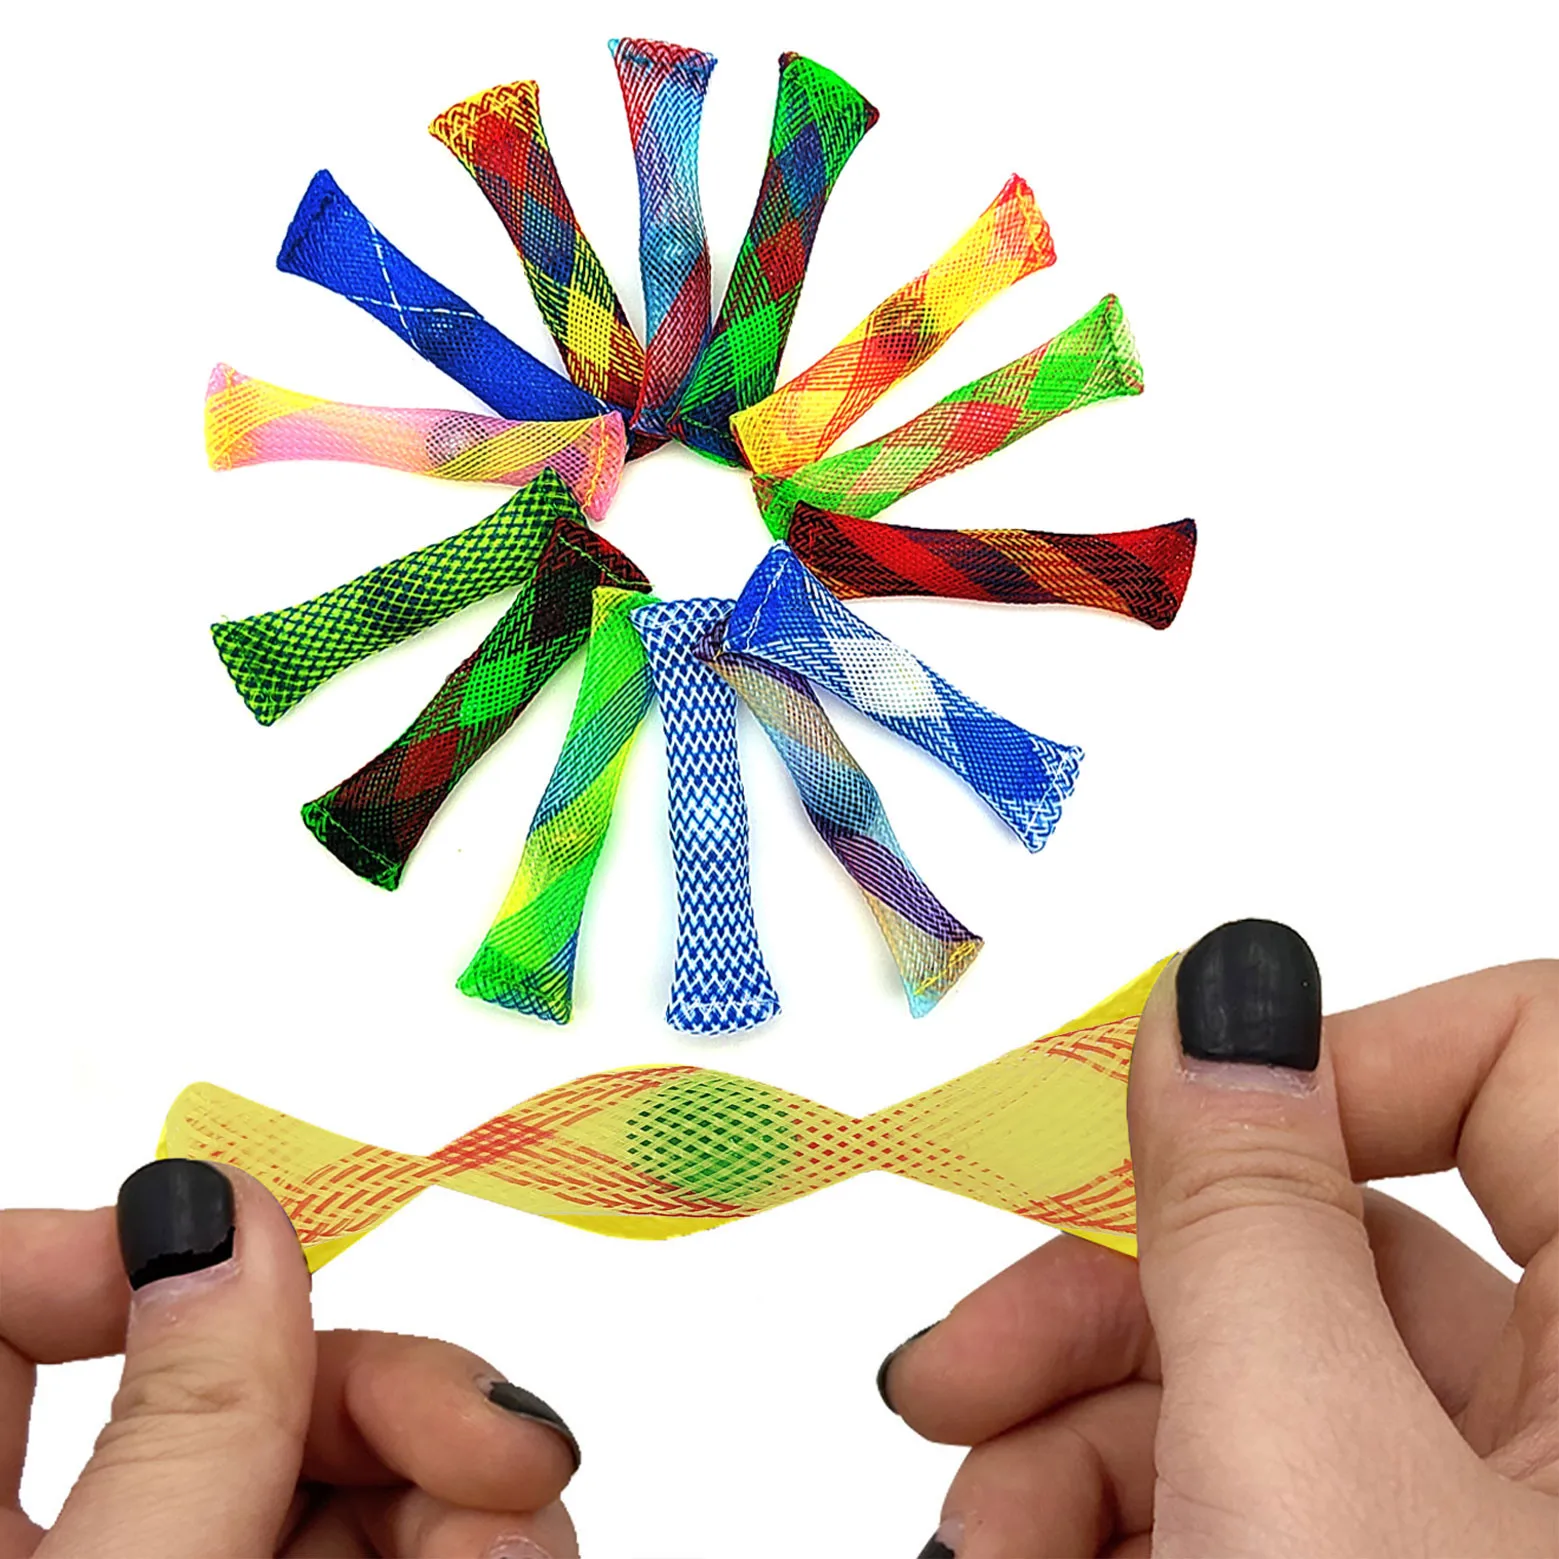 

Popit Ball Autism Adhd Anxiety Therapy Toys Edc Stress Relief Hand Fidget Toy Net Tube With Glass Marble Decompression Toy